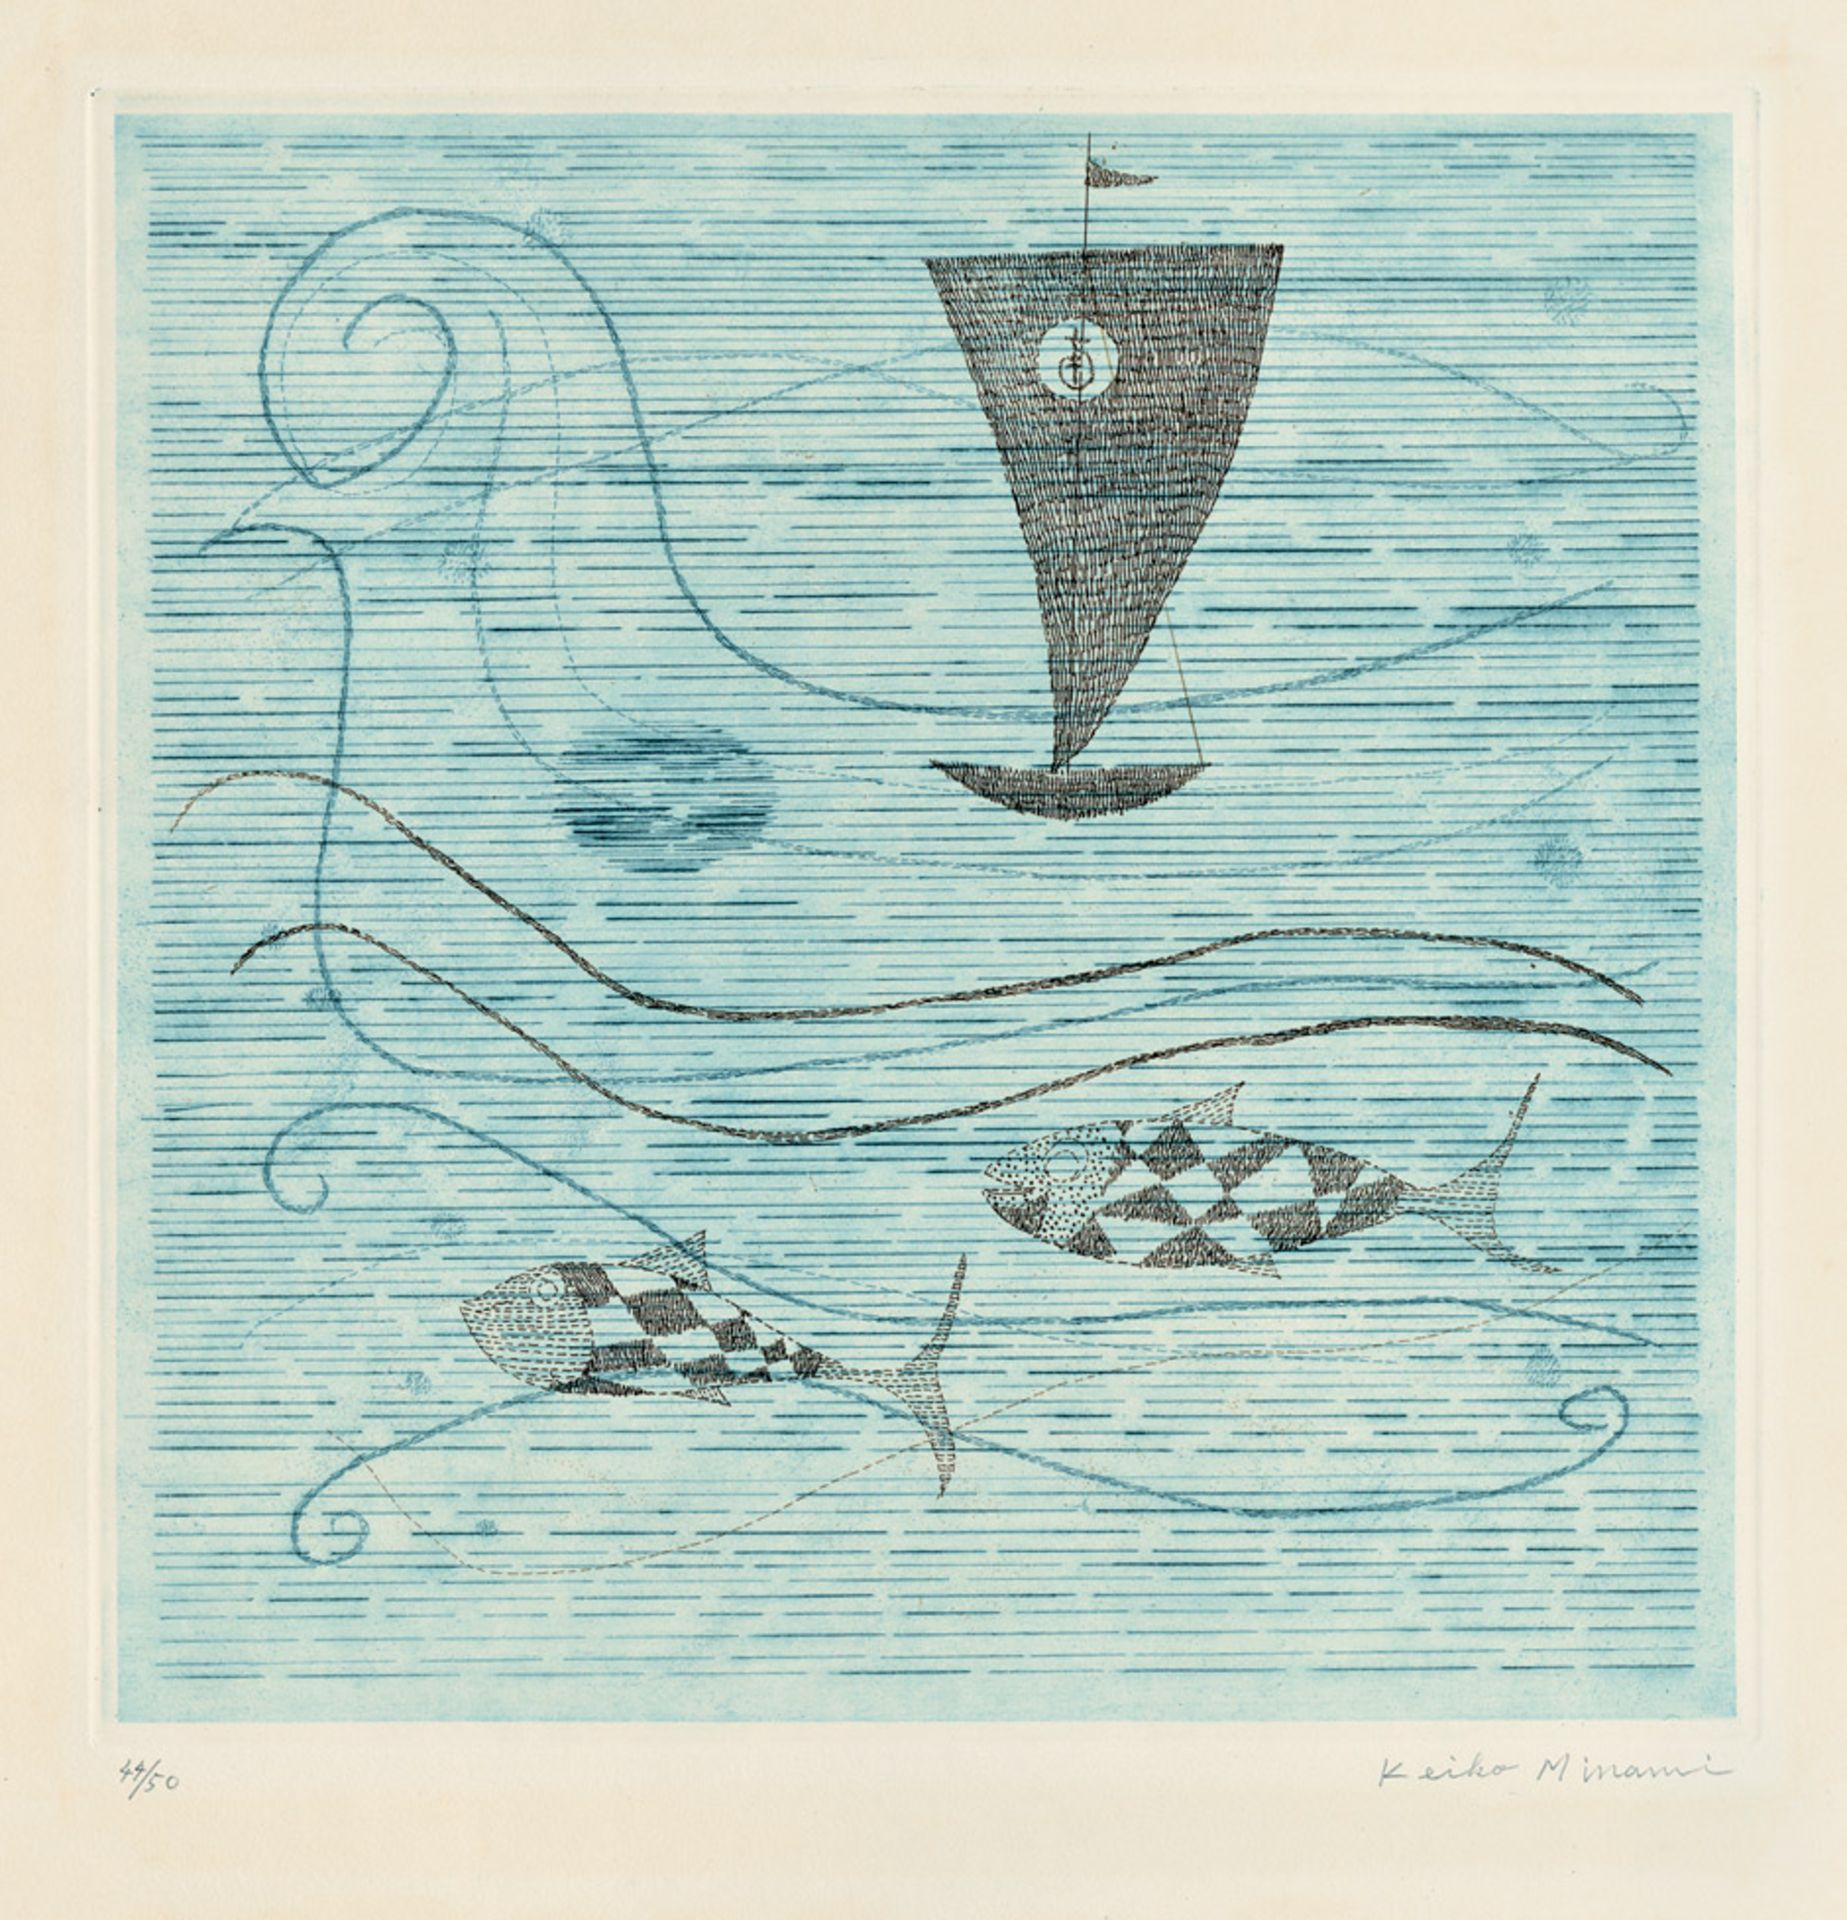 La Mer (The Sea) Color etching with aquatint on Rives wove paper. 1955. 29,7 x 29,7 cm (56,5 x 38